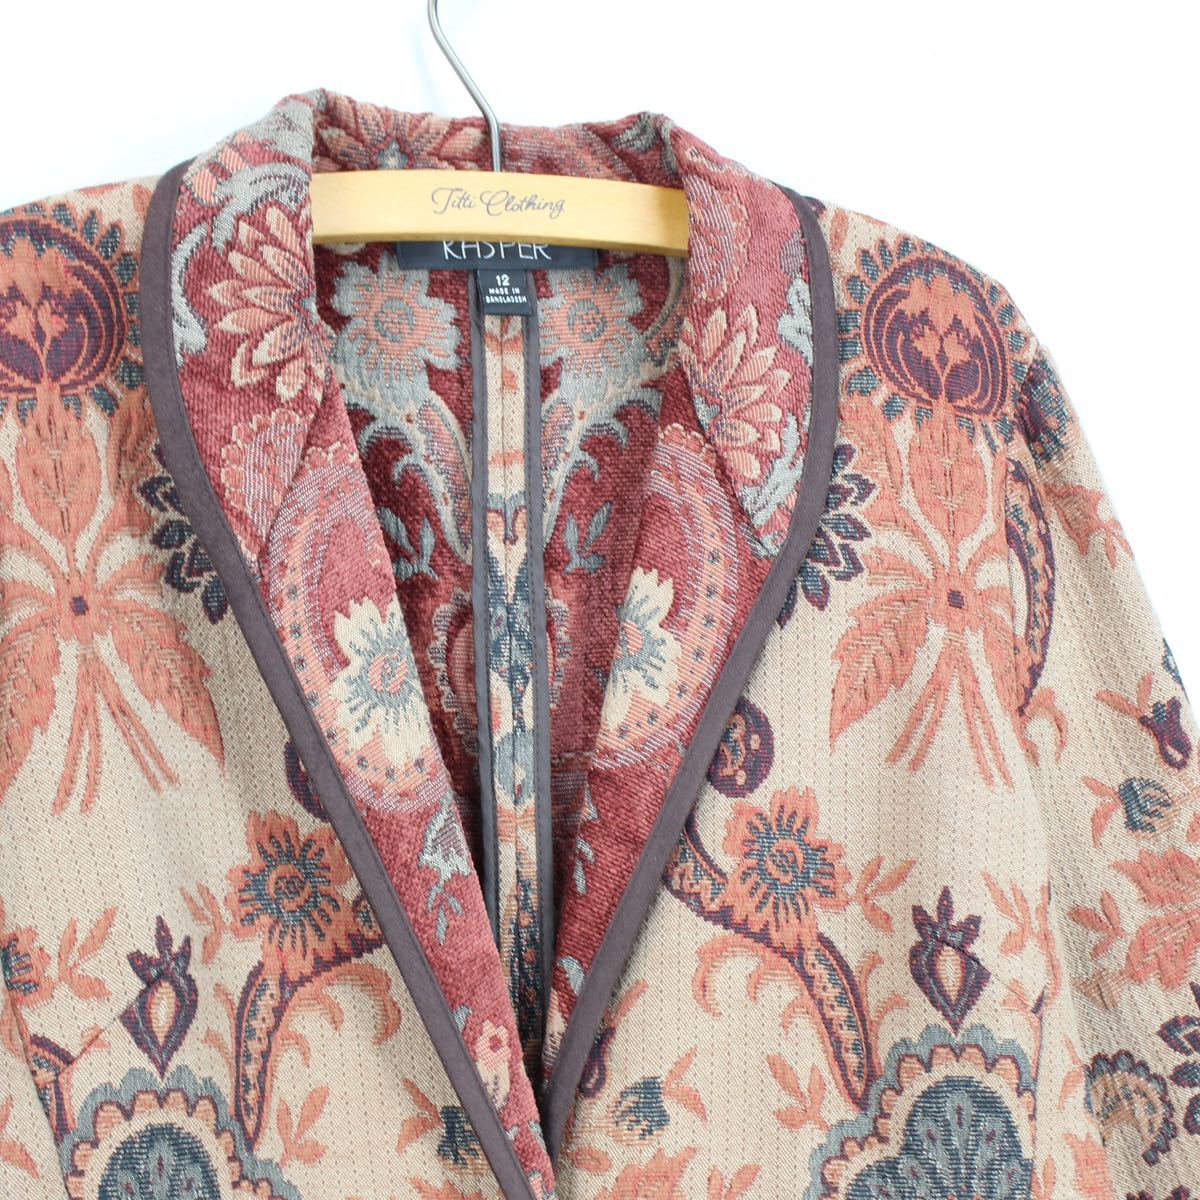 USA VINTAGE KASPER PAISLEY PATTERNED EMBROIDERY JACQUARD JACKET/アメリカ古着ペイズリー柄刺繍ジャガードジャケット_画像3